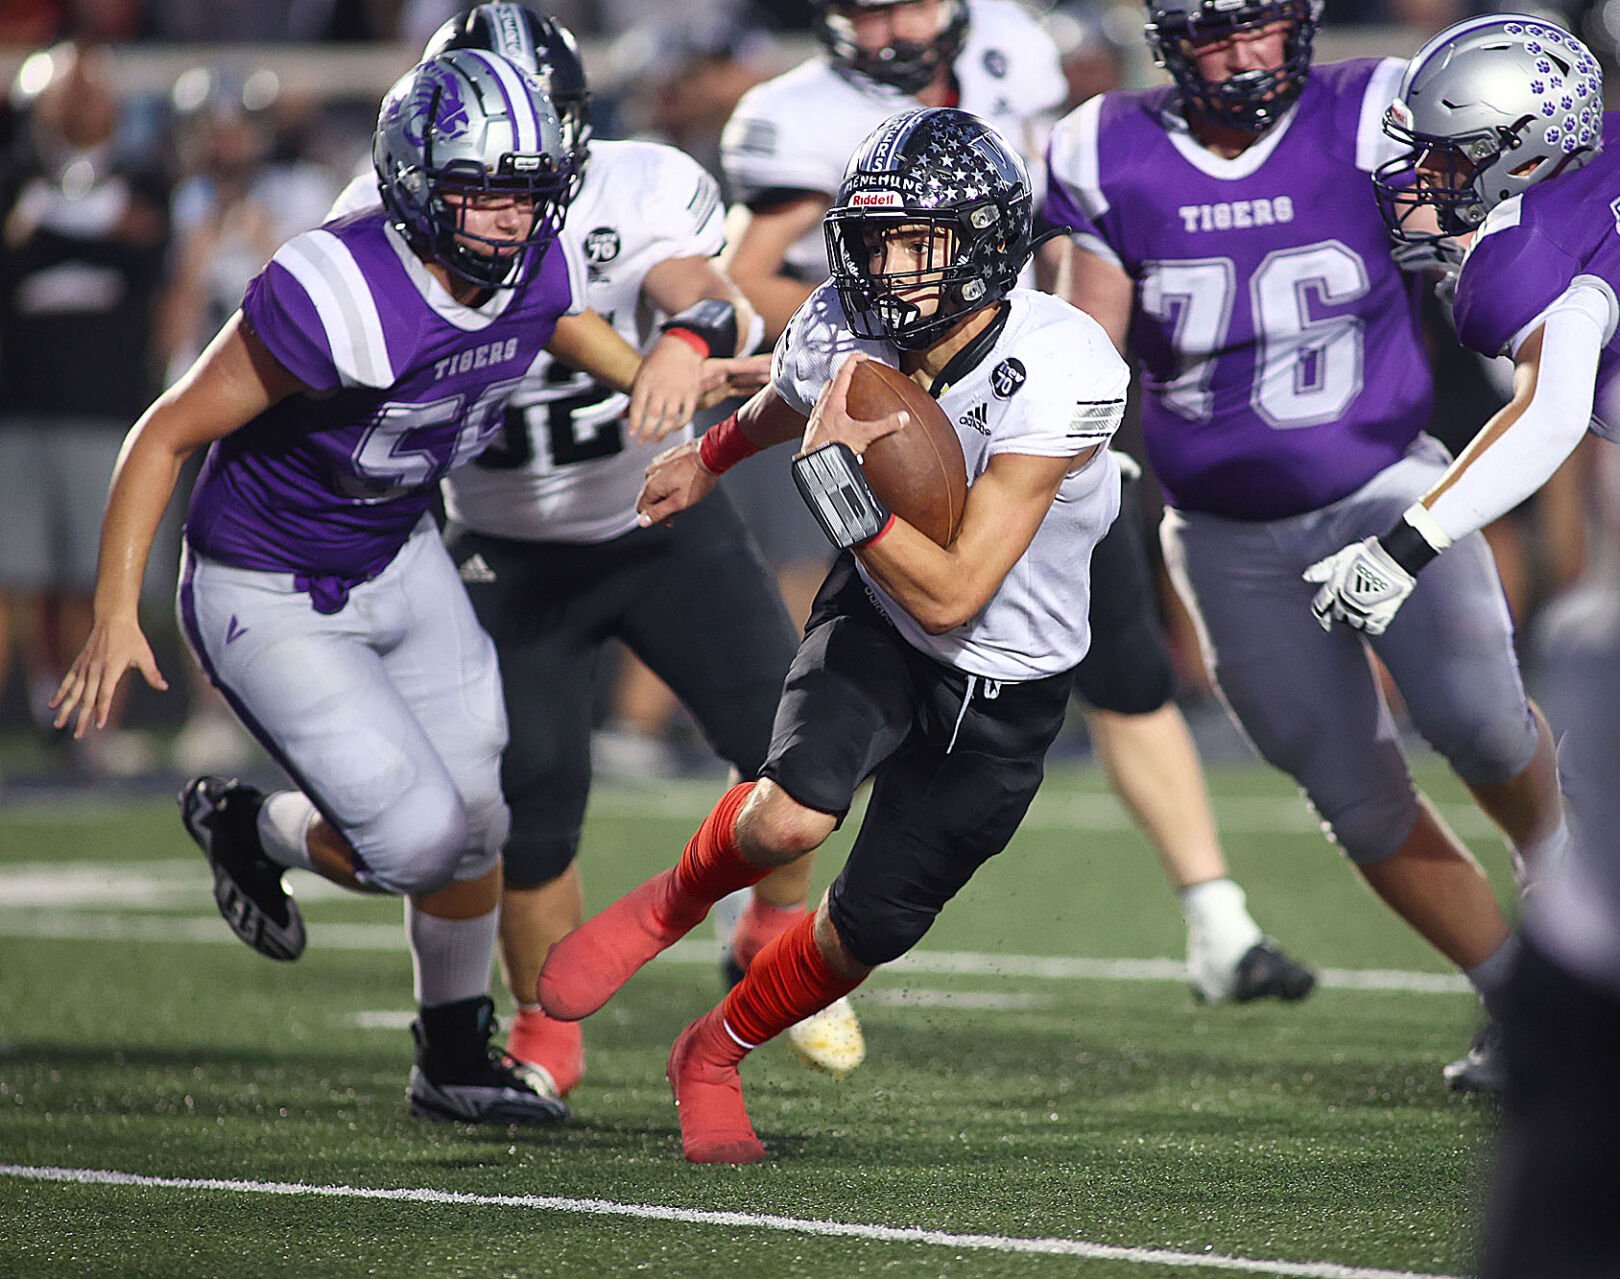 High-Scoring Shootout Between Northwestern and Western: 14 Touchdowns, 95 Points